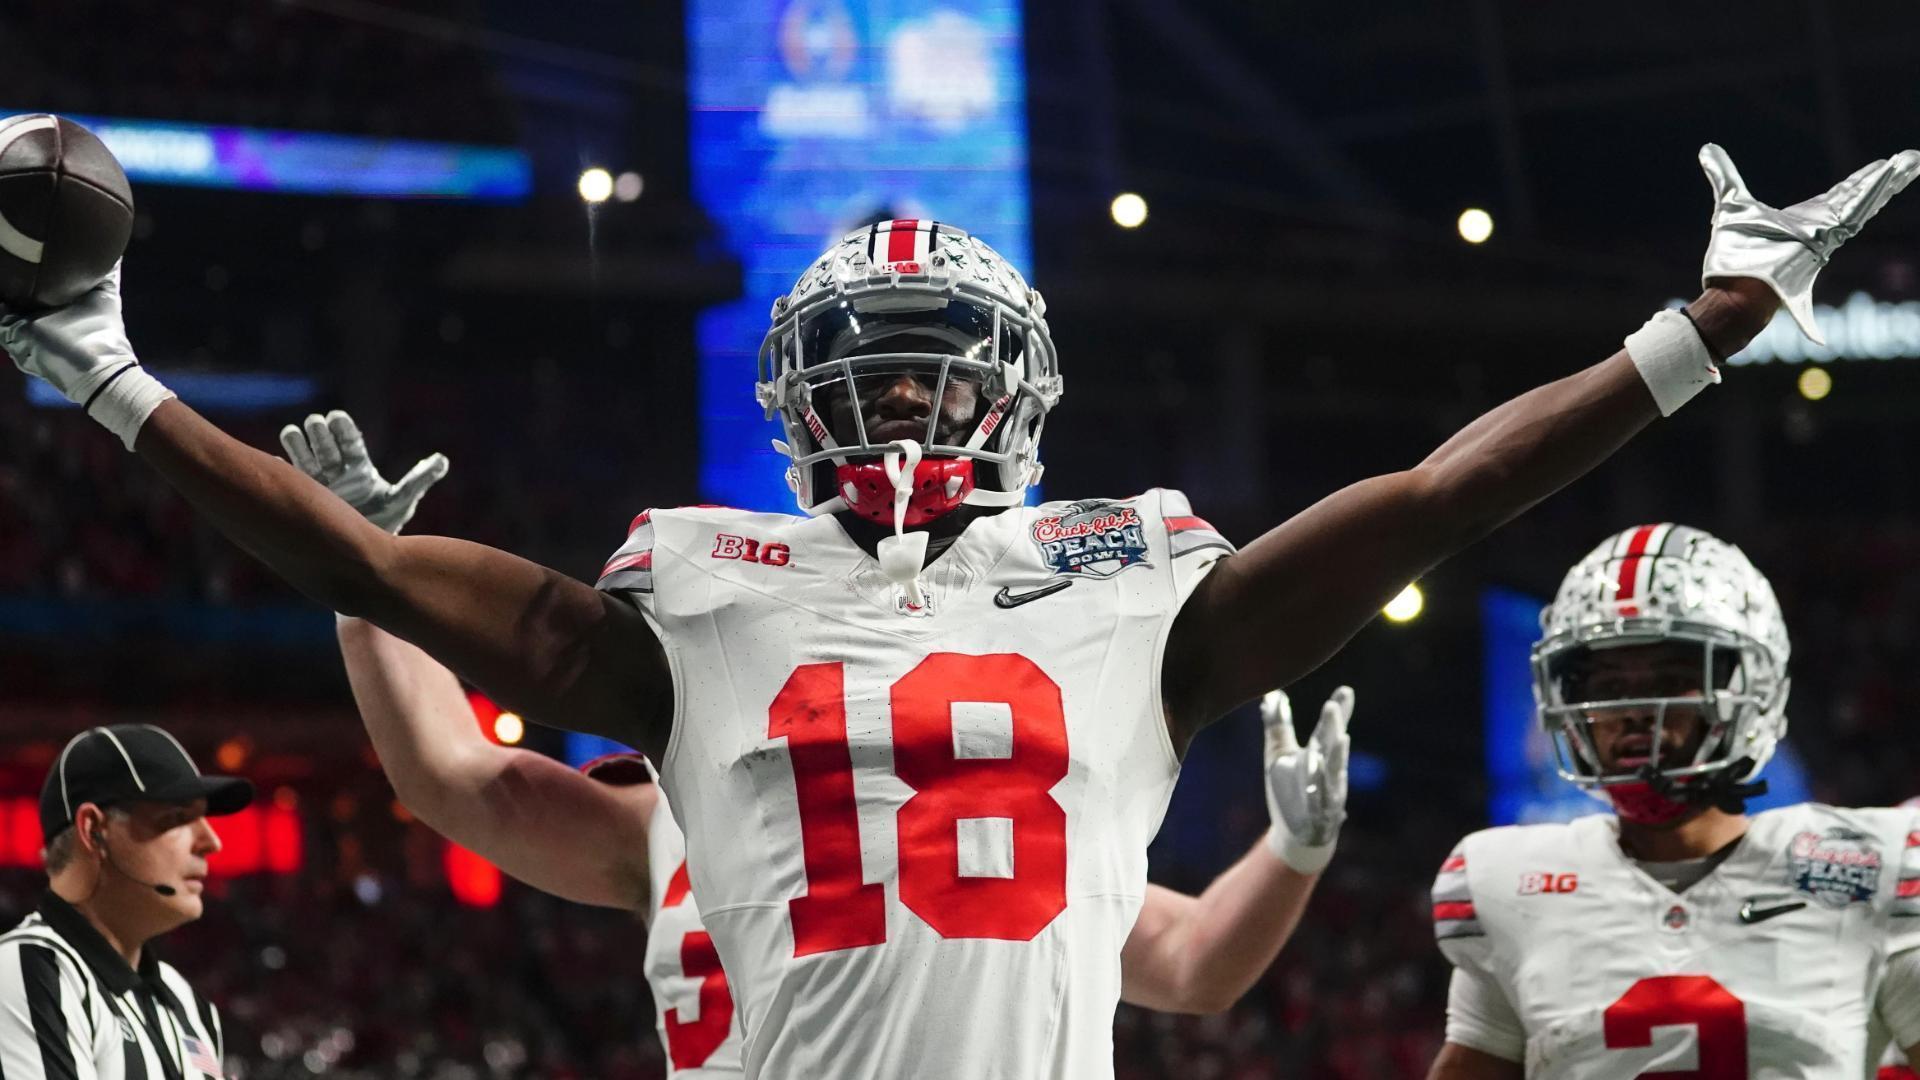 Rising Star Skips NFL Combine How Marvin Harrison Jr.'s Bold Move Shakes Up Draft Predictions